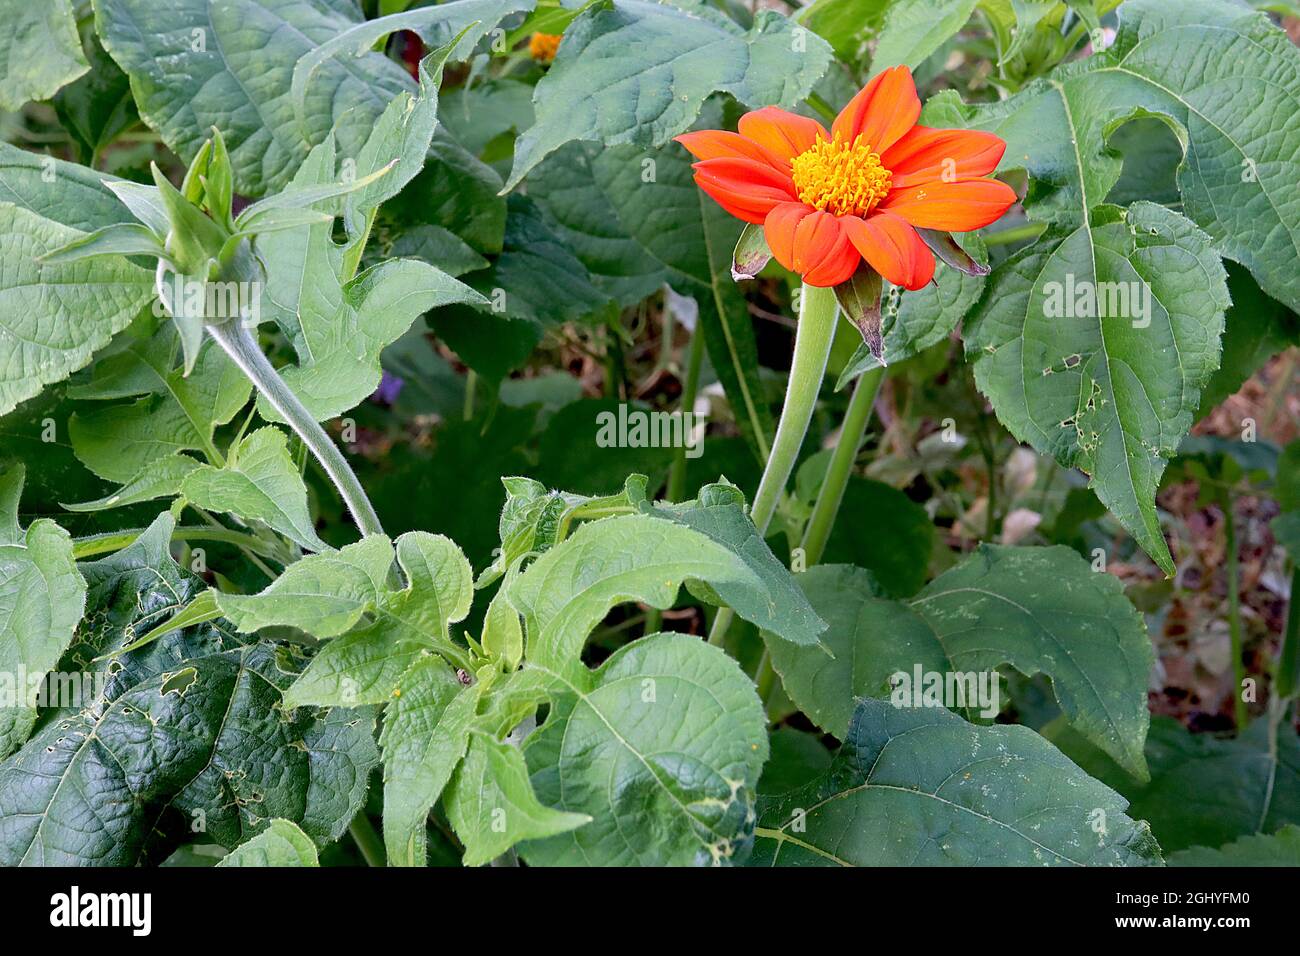 Tithonia rotundifolia ‘Torch’ Mexican sunflower Torch – bright orange daisy-like flowers and mid green broad ovate and deeply lobed leaves,  August,UK Stock Photo